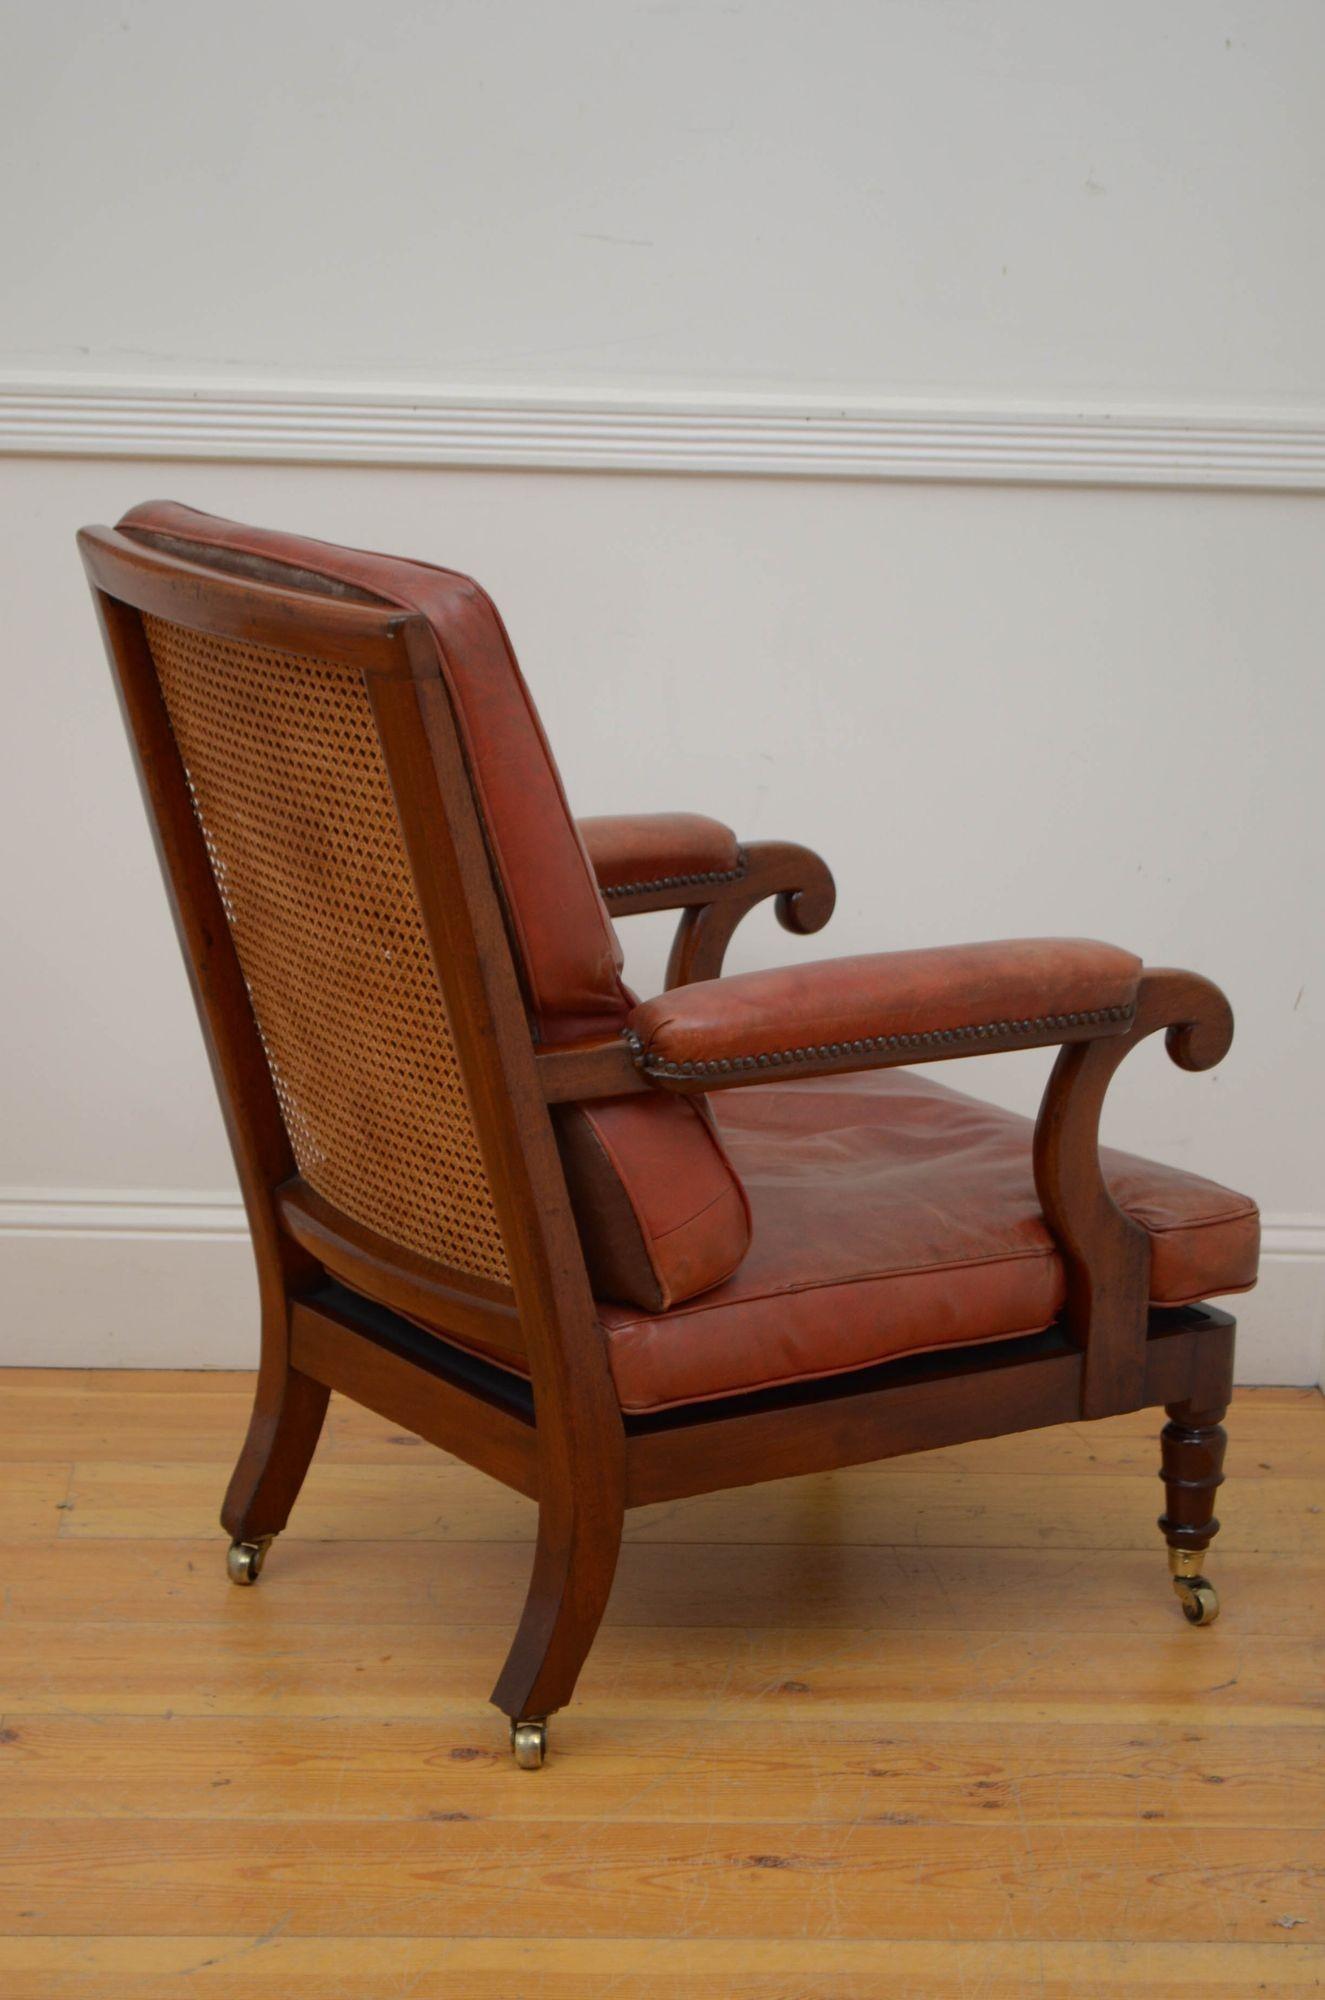 George III Mahogany Library Chair In Good Condition For Sale In Whaley Bridge, GB